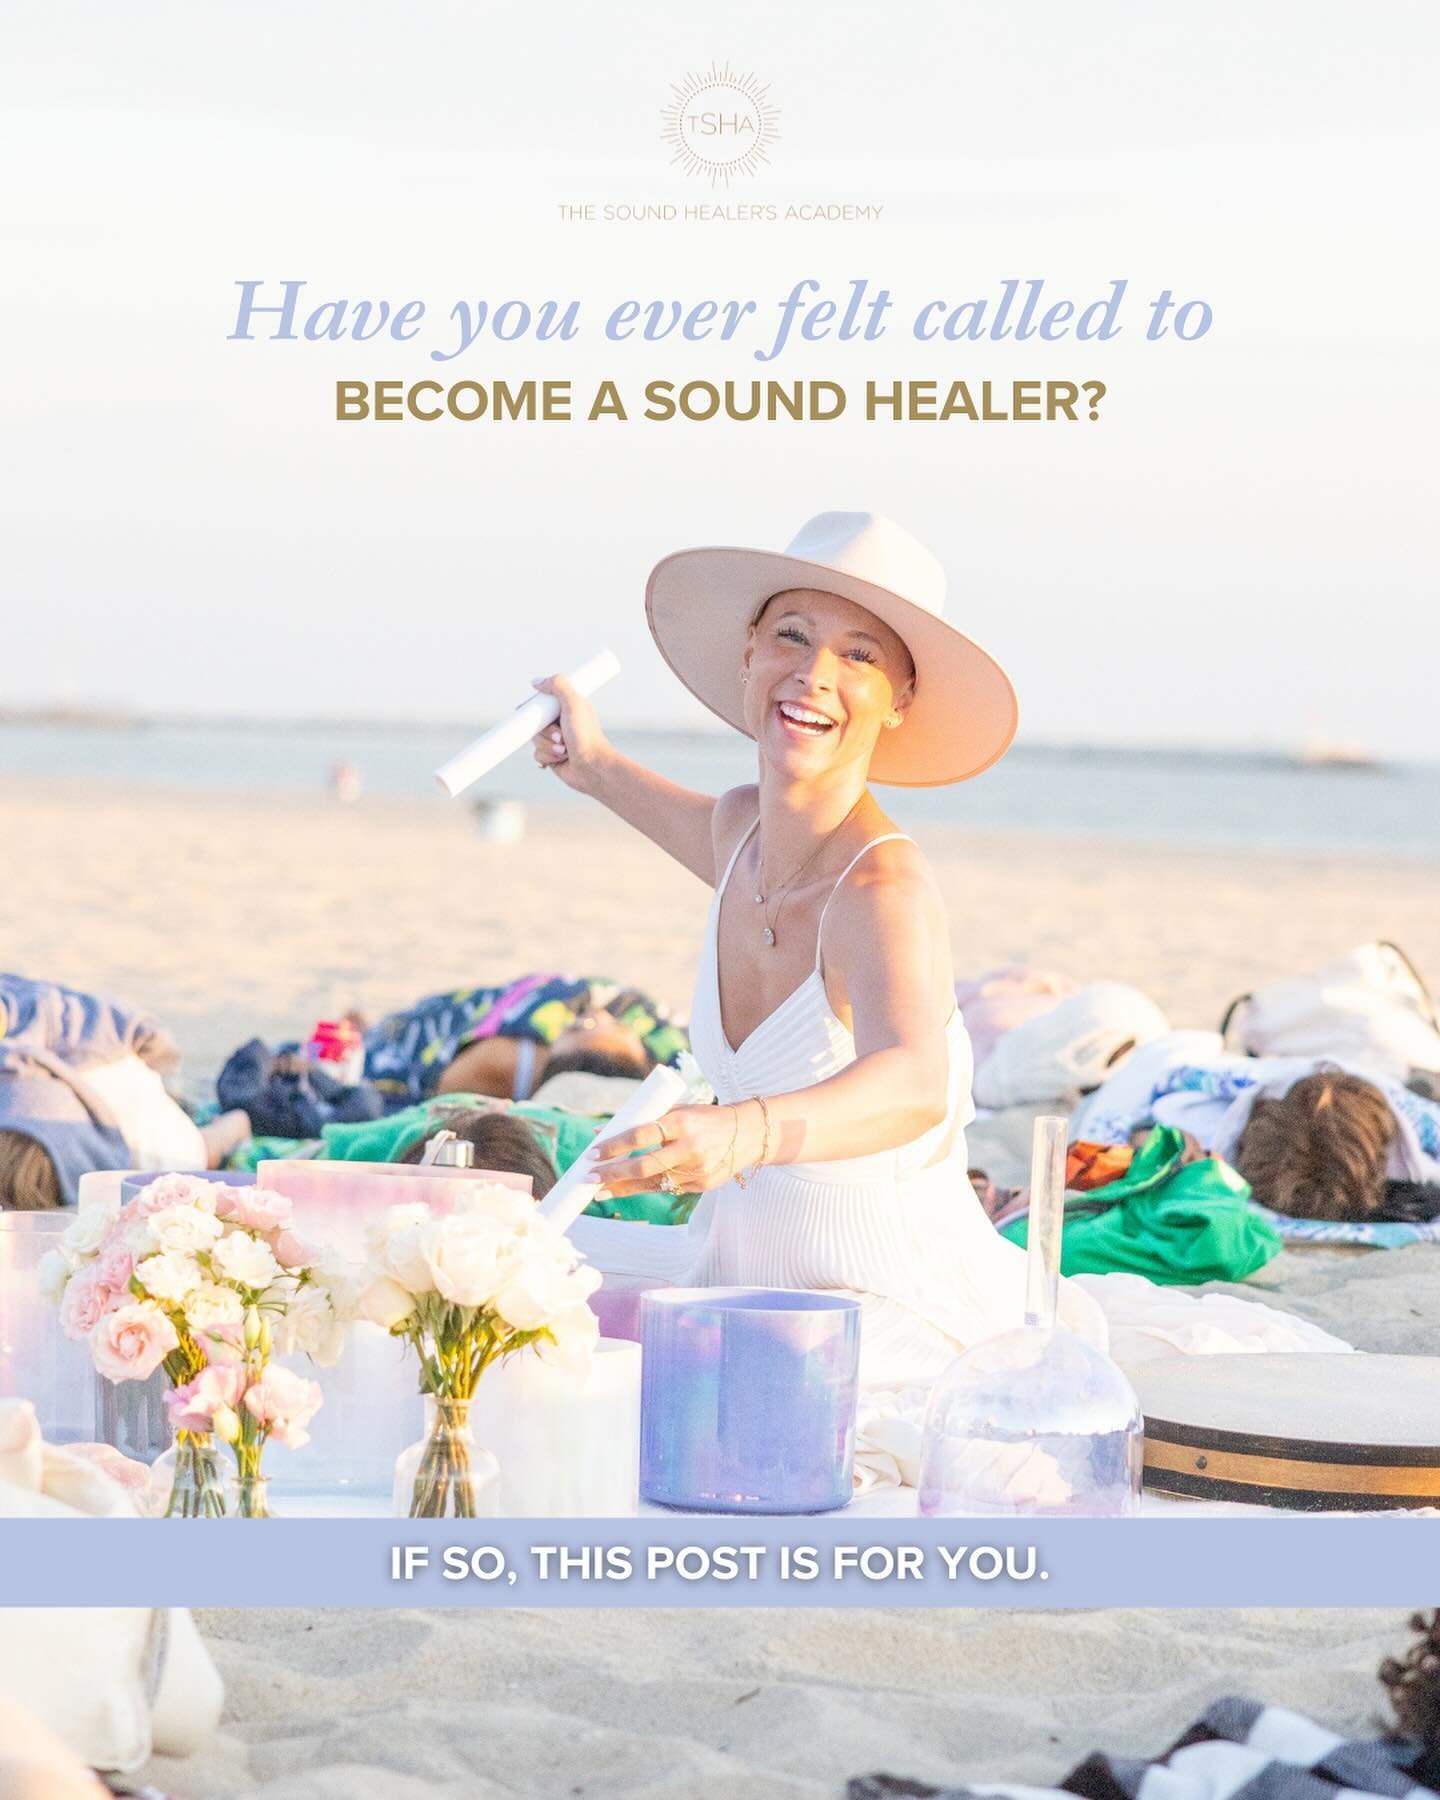 Have you ever felt called to become a sound healer? Does your gut tell you that you were meant to create your own business? Do you feel drawn to the crystal singing bowls?

If so, this is your sign!

If what has been holding you back has been a sense